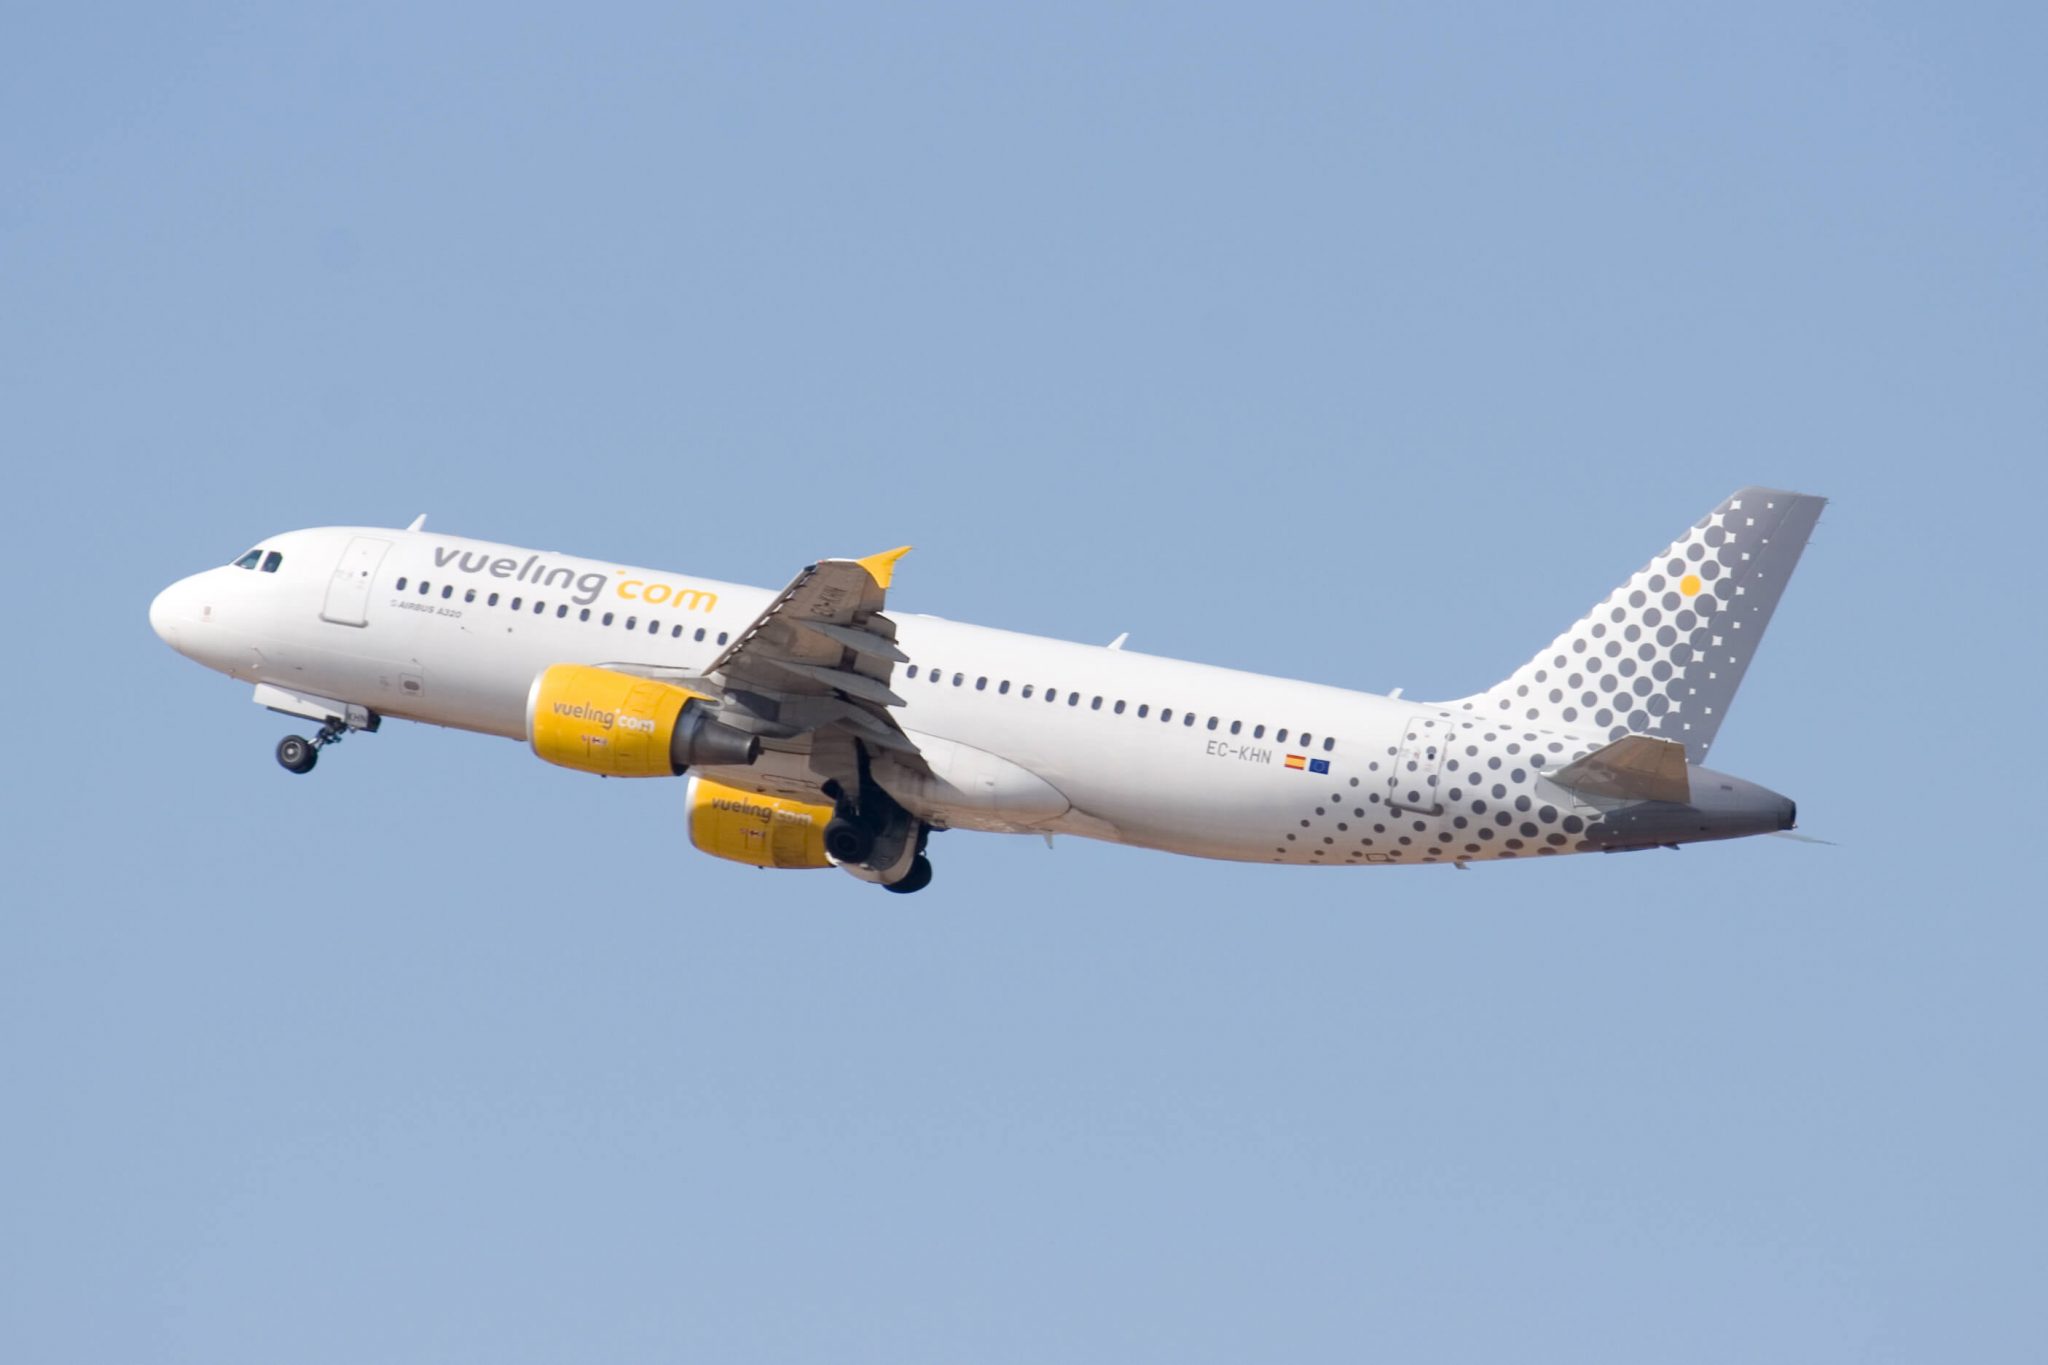 Goshawk delivers an A320 to Vueling